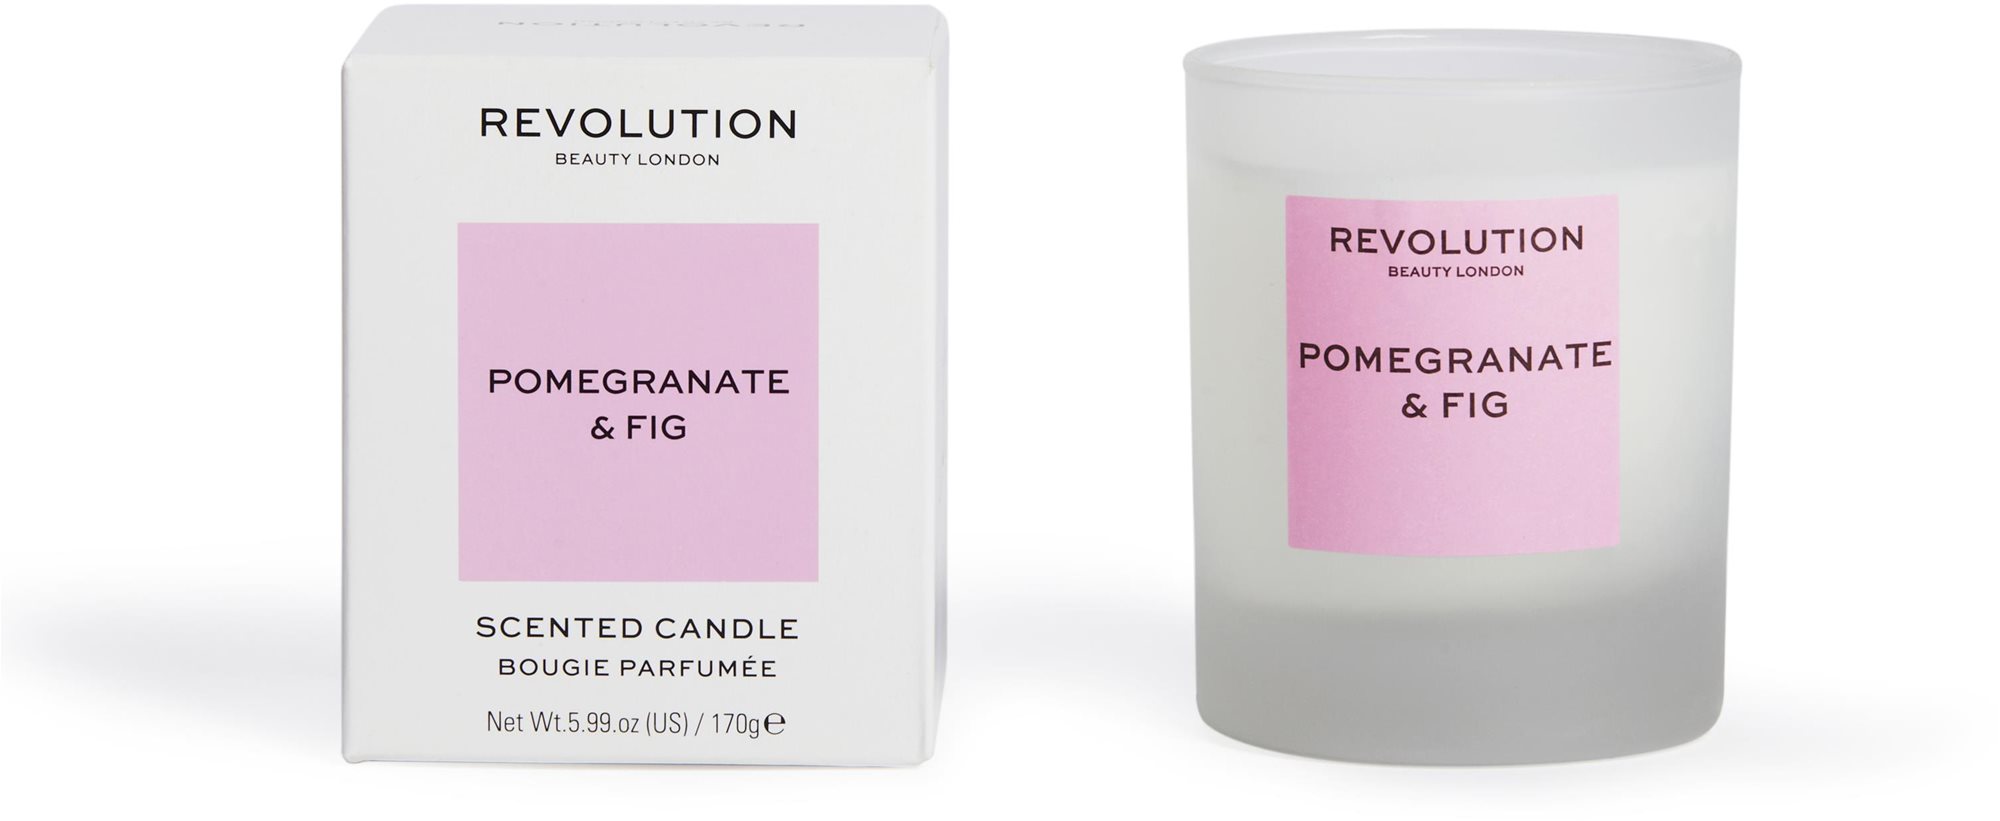 REVOLUTION Pomegranate & Fig Scented Candle 170 g